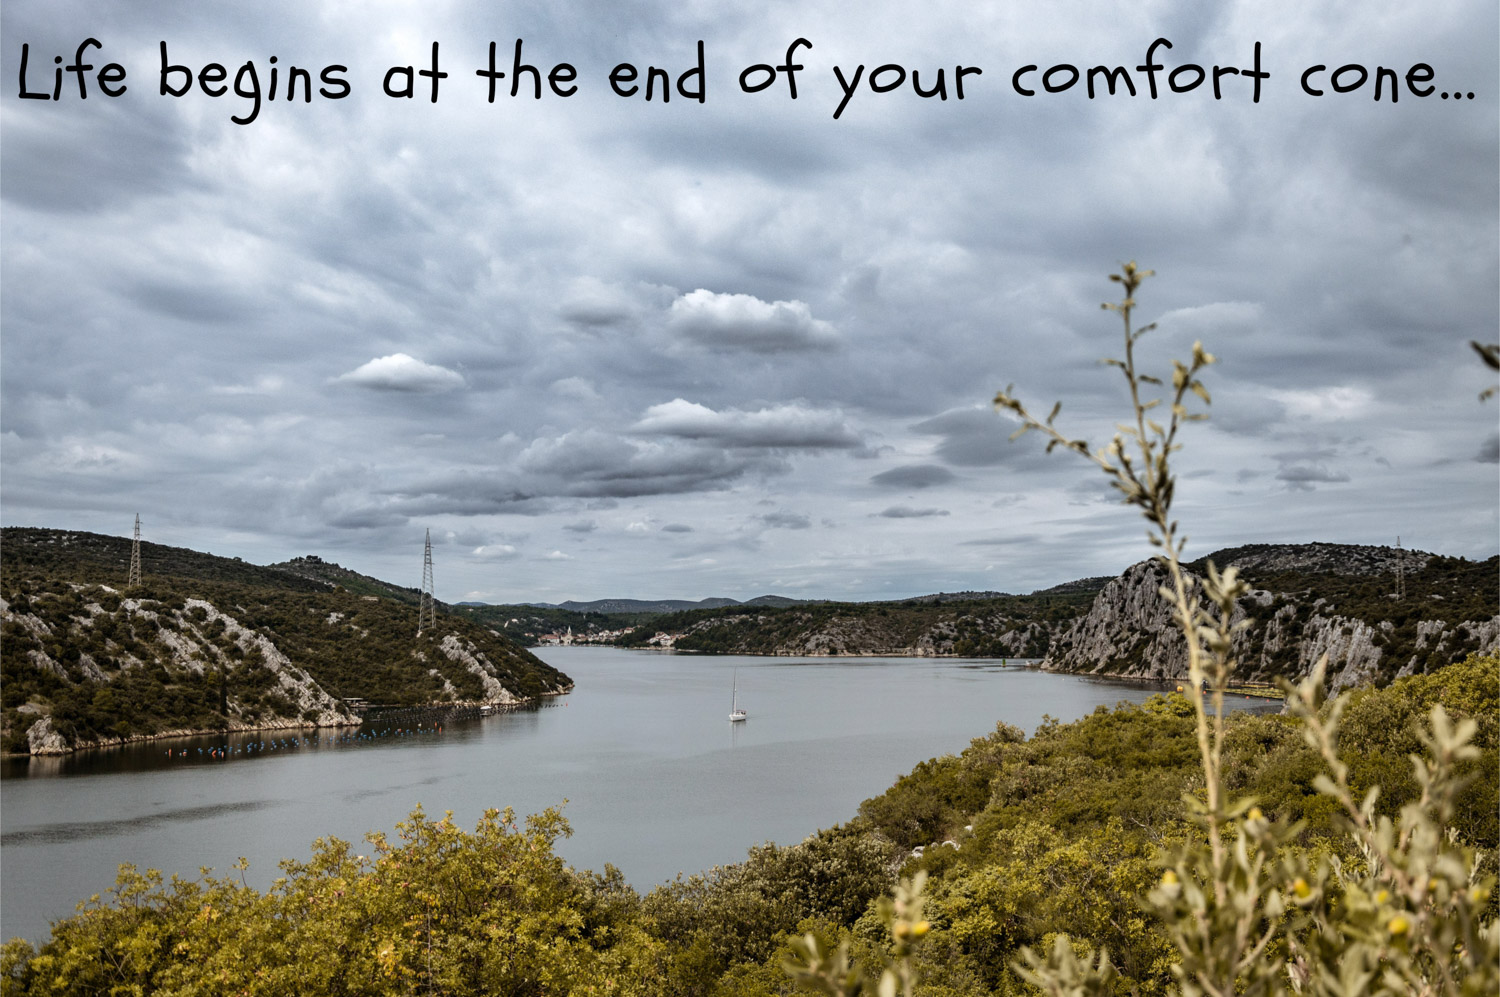 End of comfort zone quote